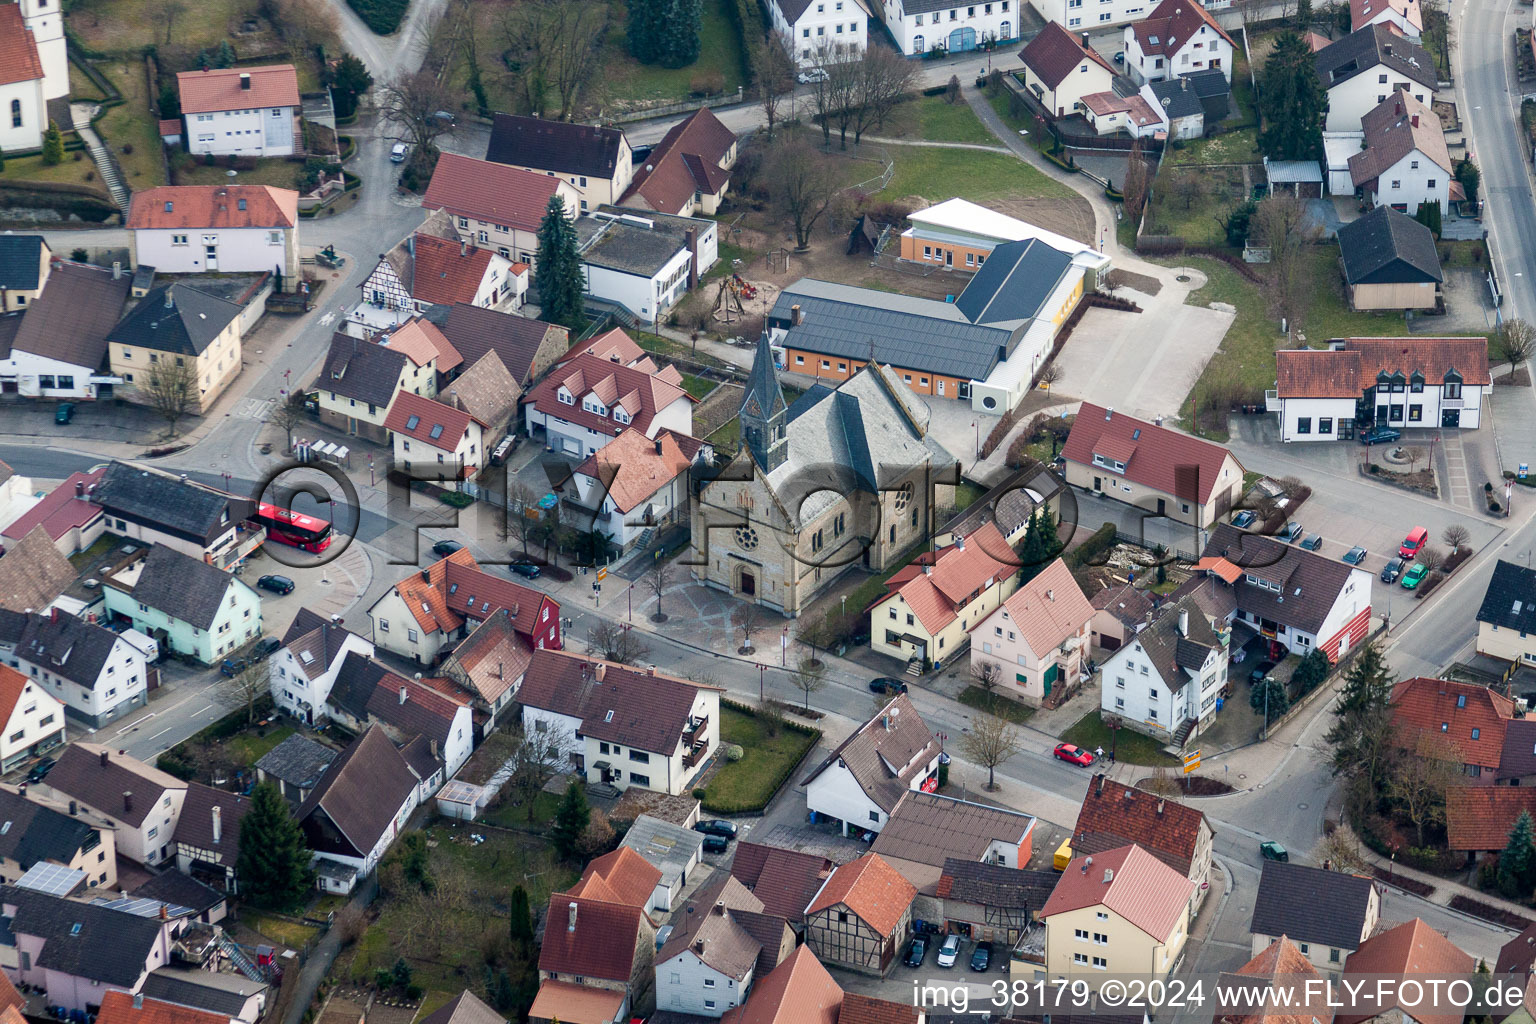 Church building in the village of in the district Obergimpern in Bad Rappenau in the state Baden-Wurttemberg, Germany